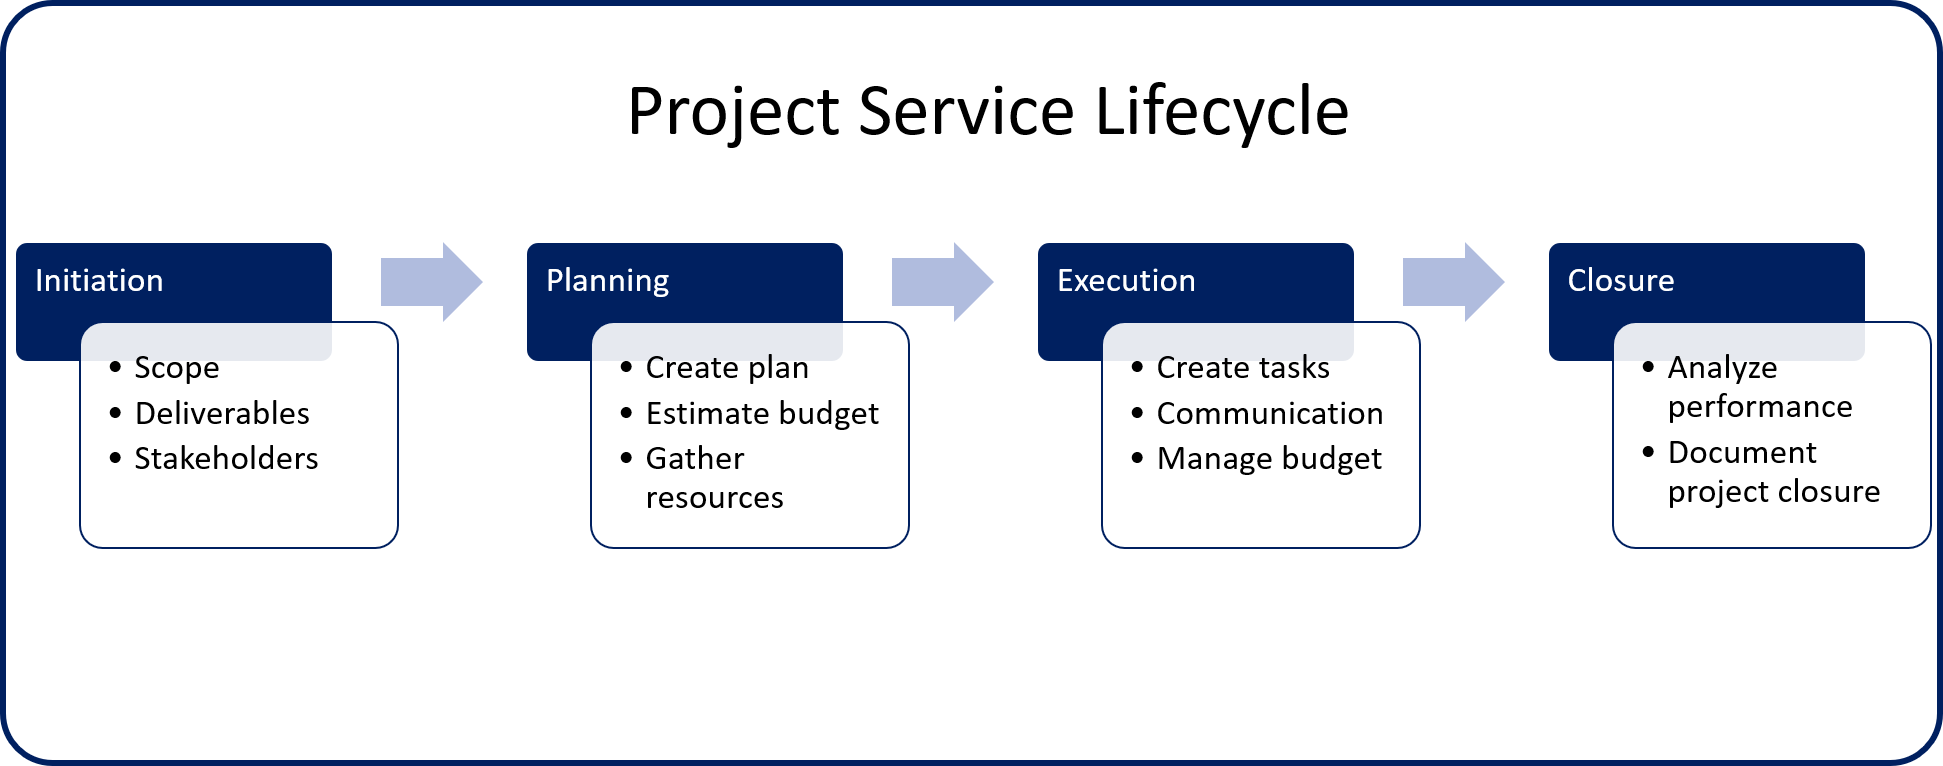 Project Services Lifecycle in Dynamics 365 Project Operations